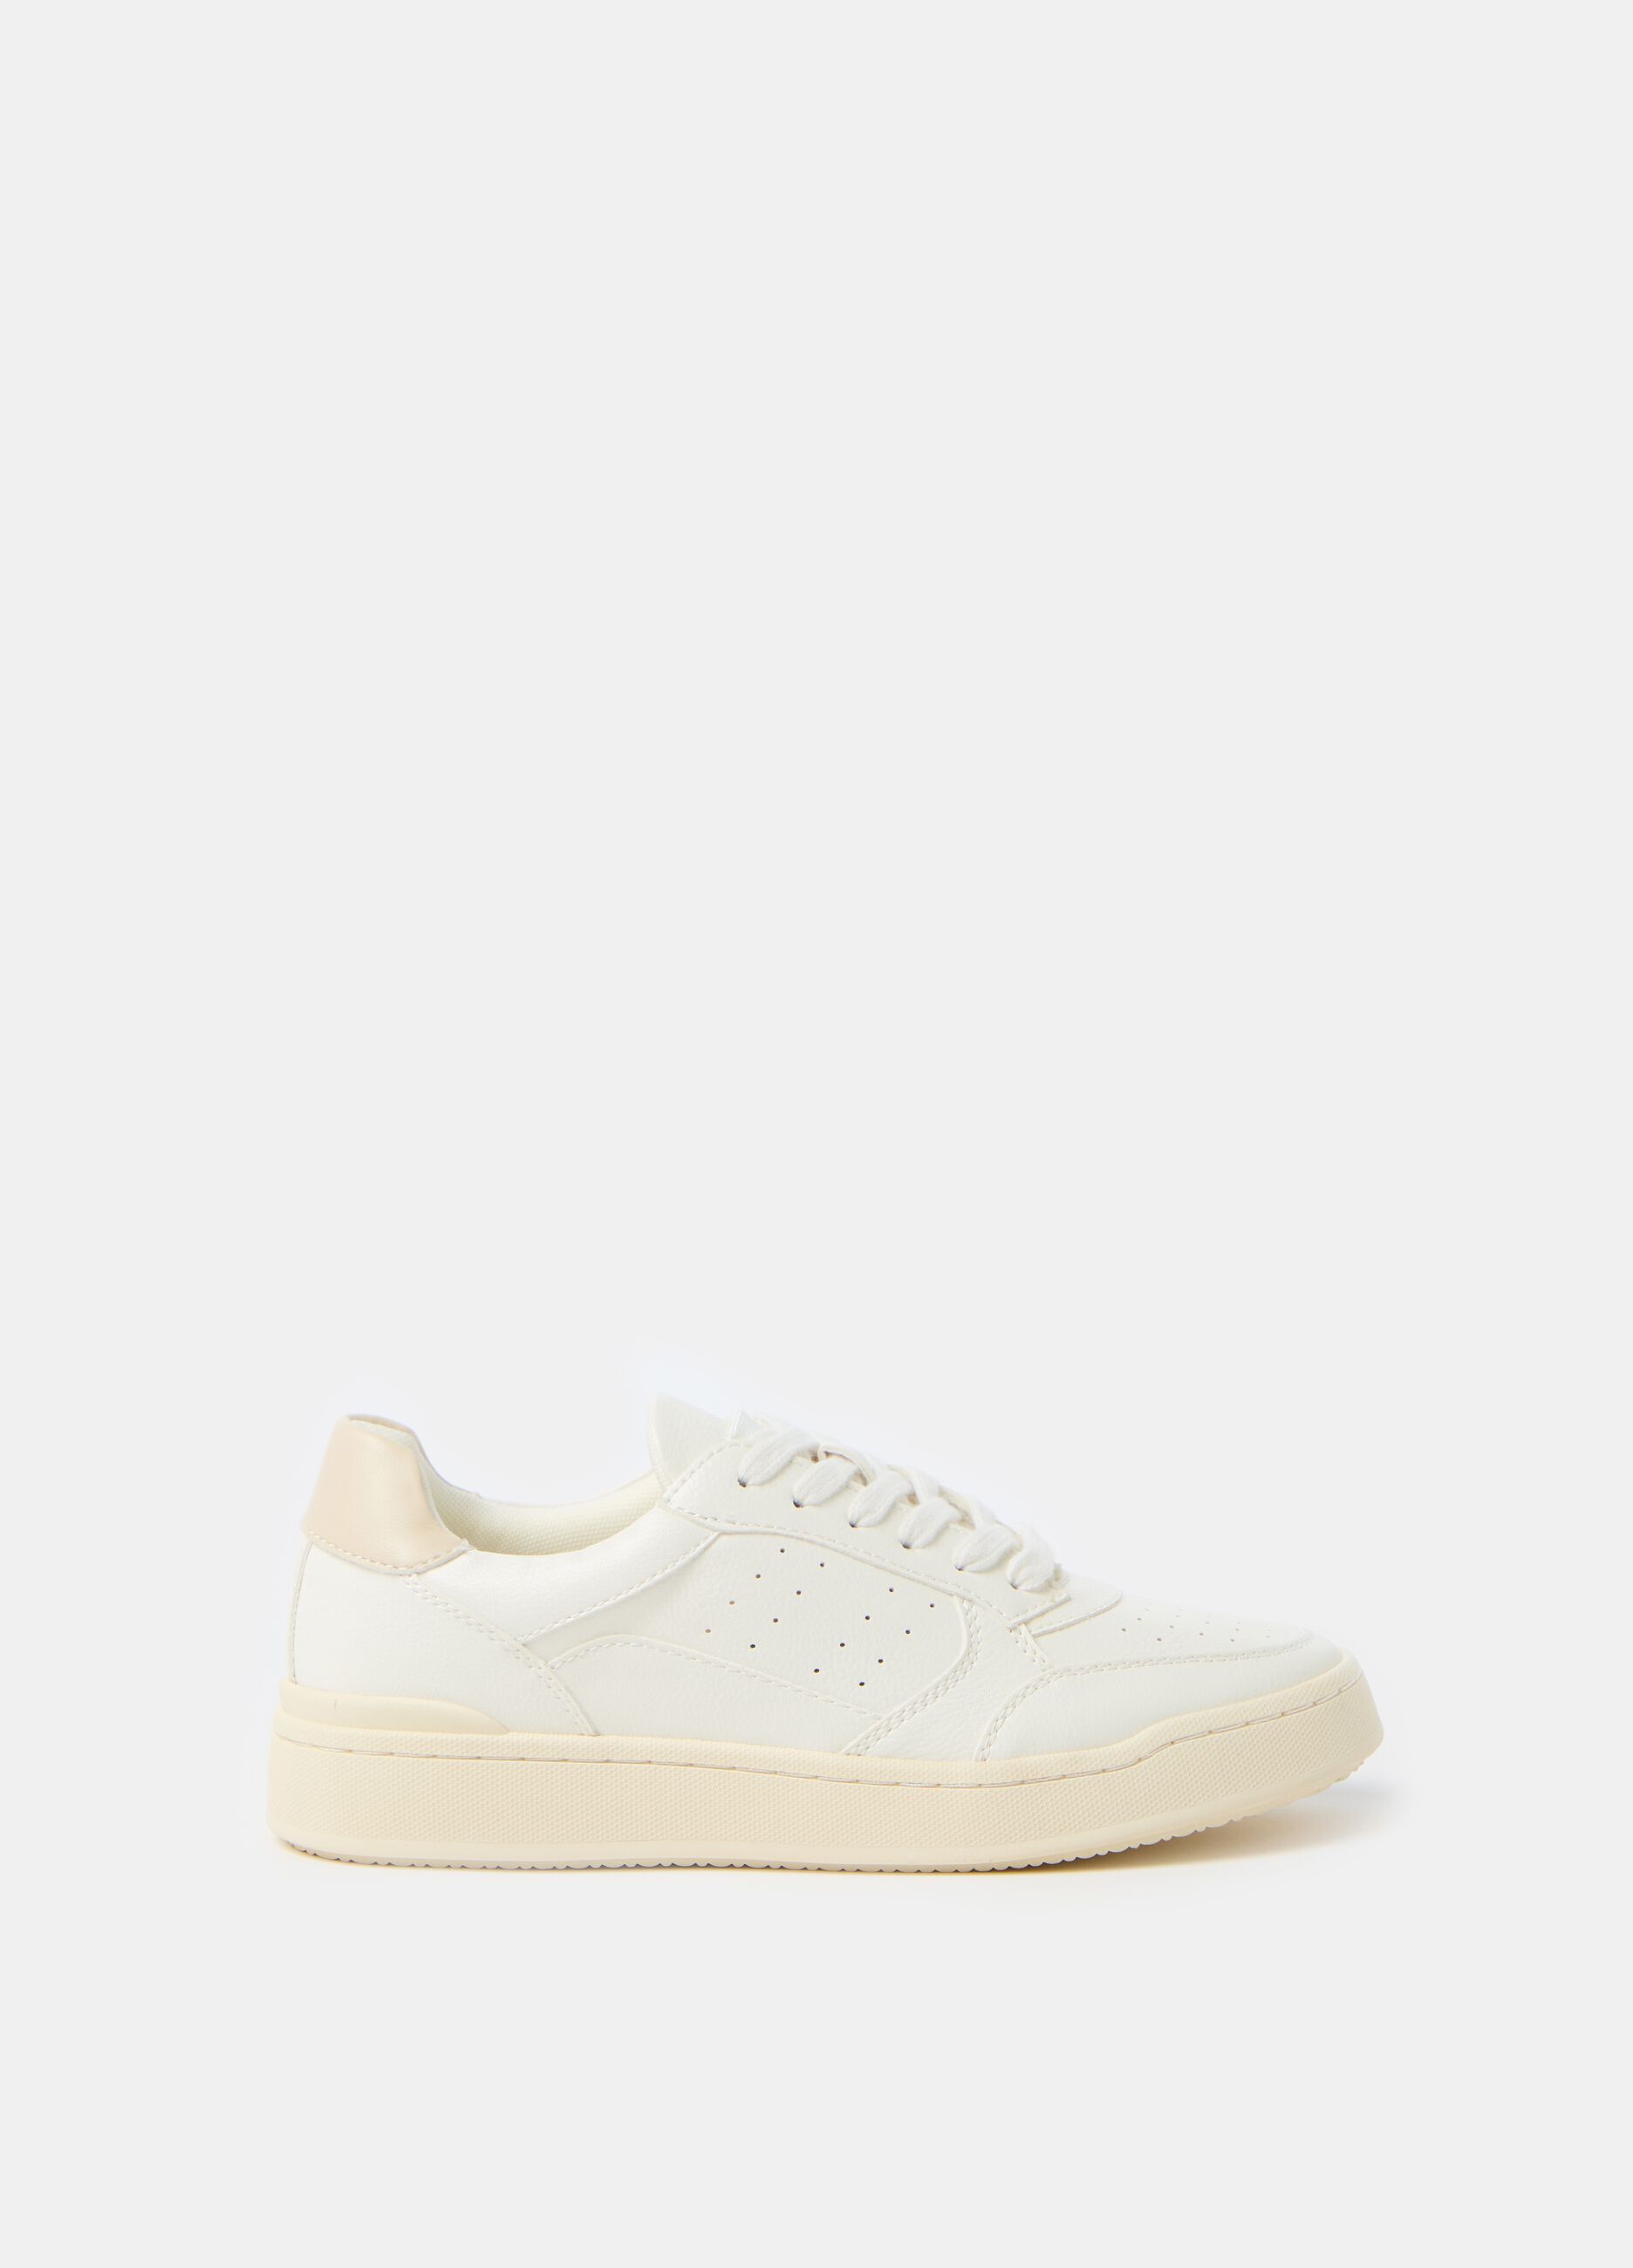 Essential lace-up sneakers